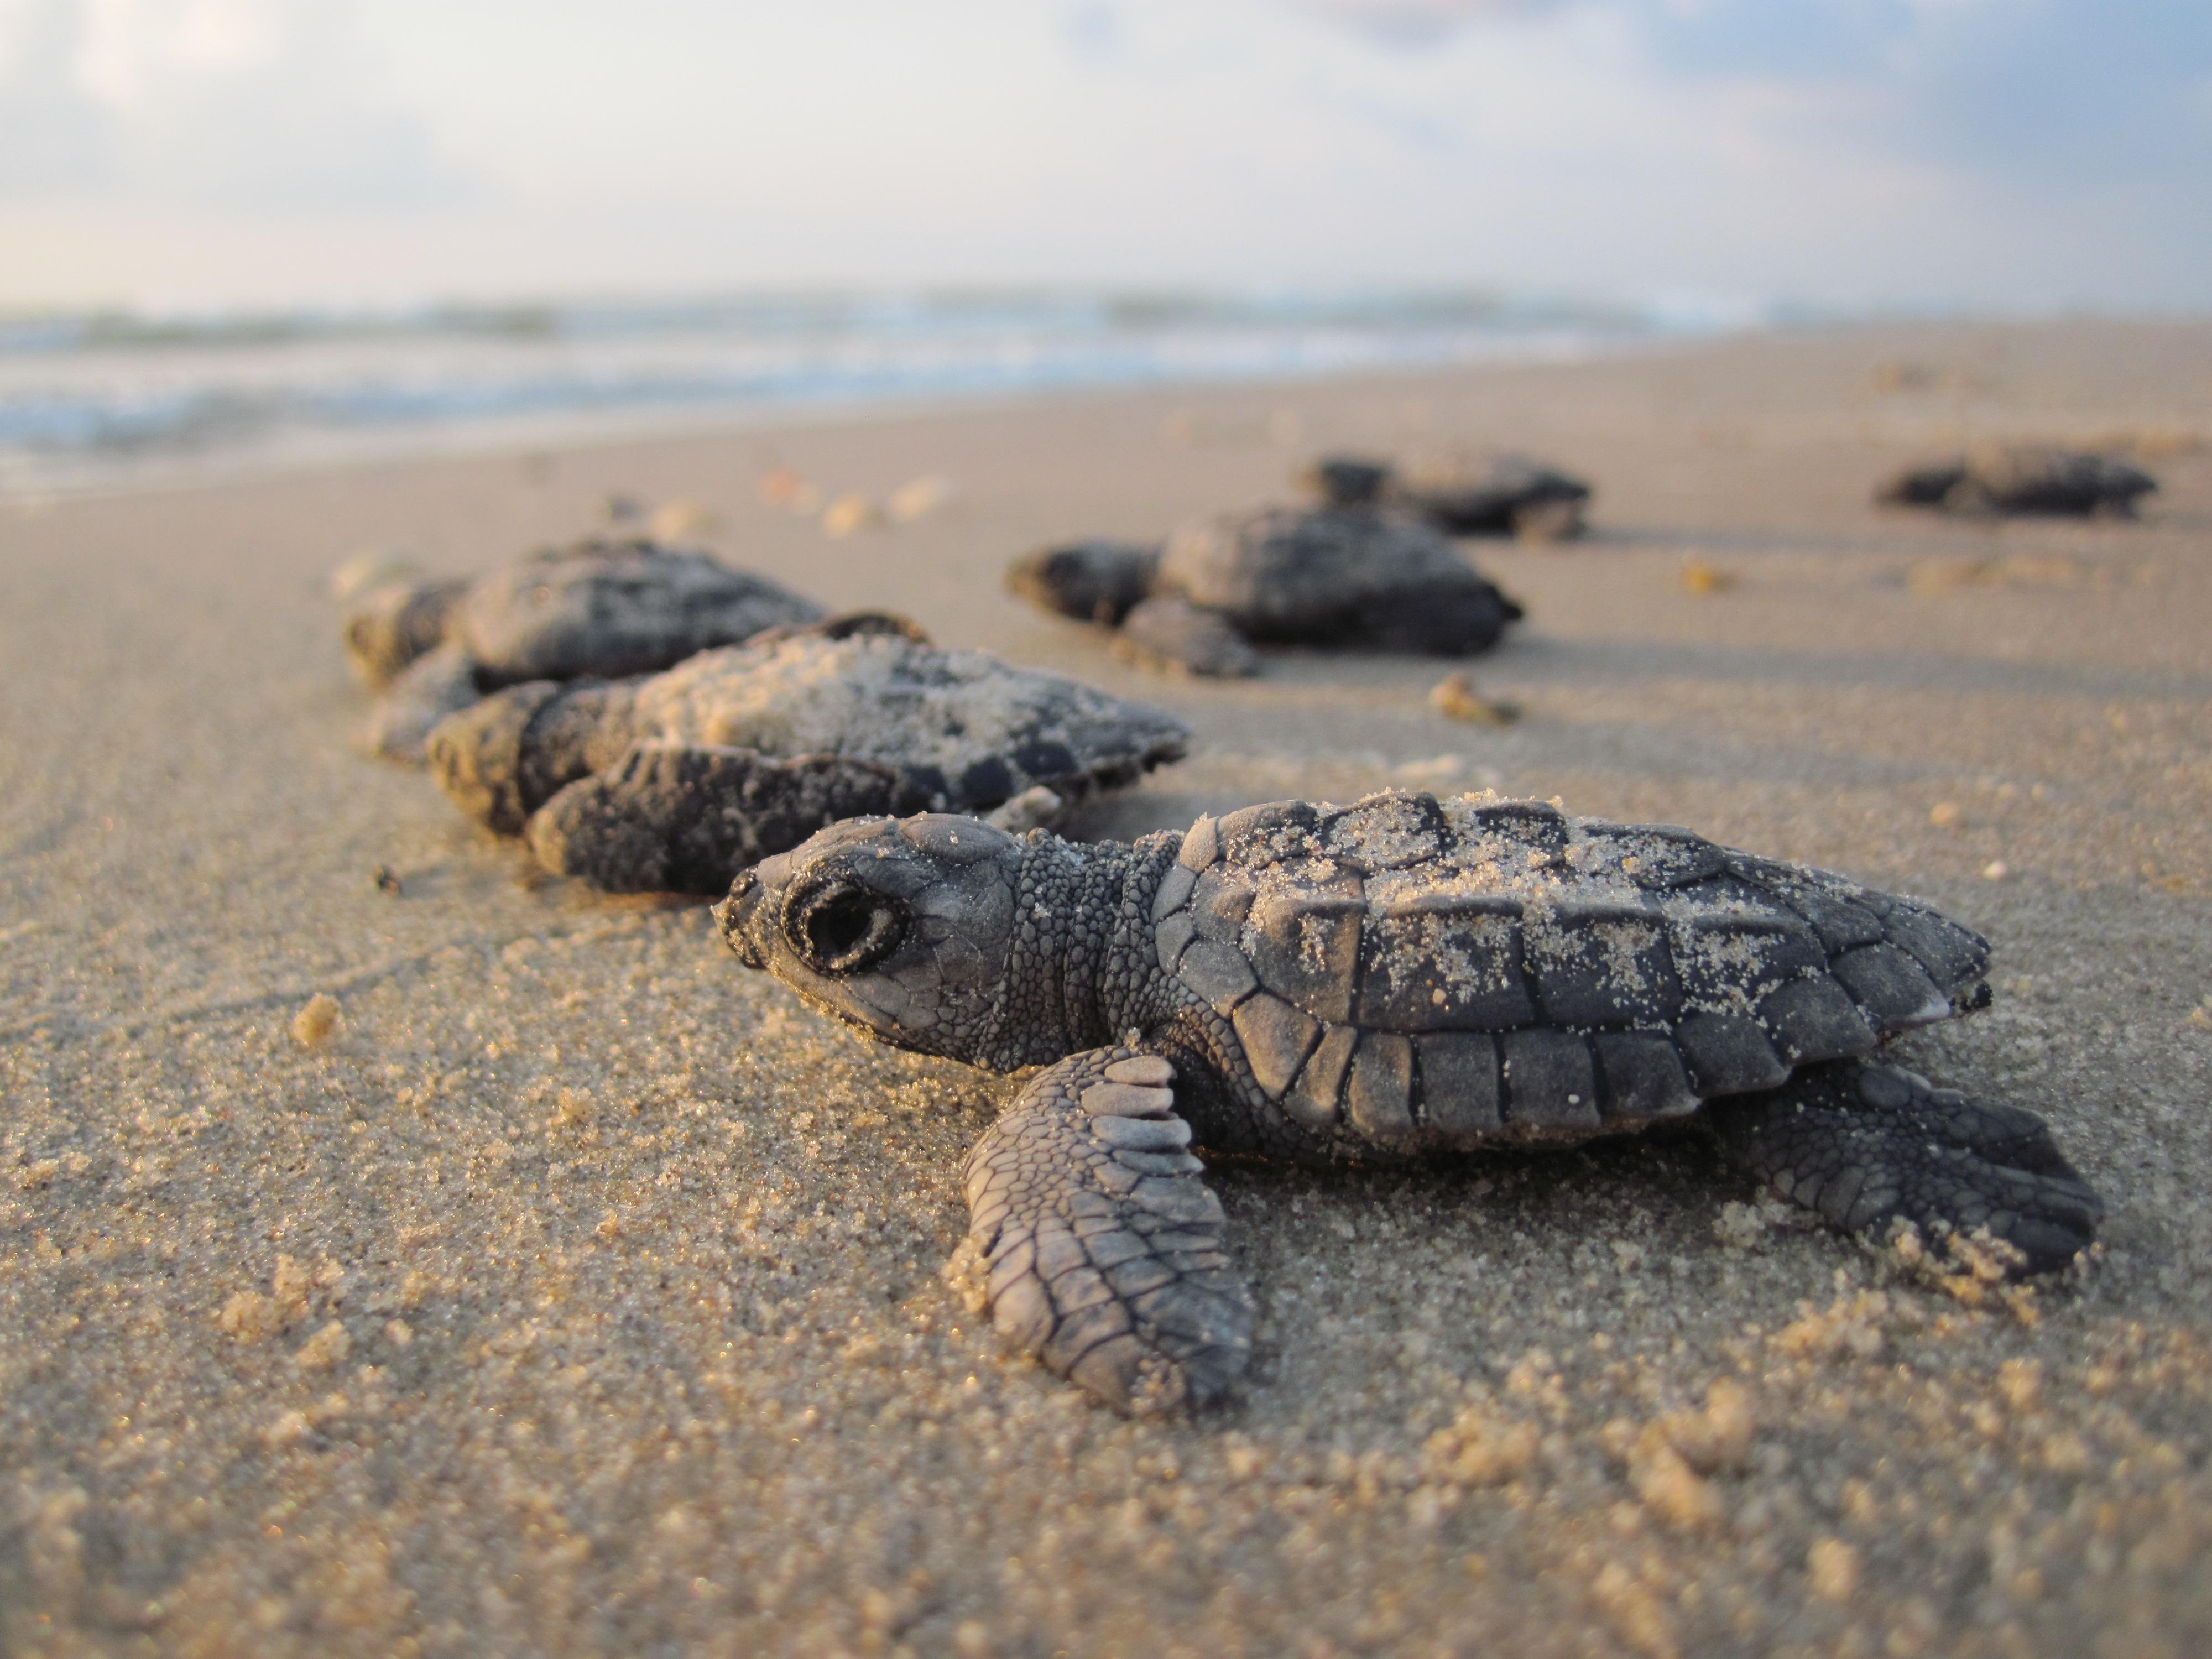 Several sea turtle hatchlings crawl on the sand towards the Gulf of Mexico.